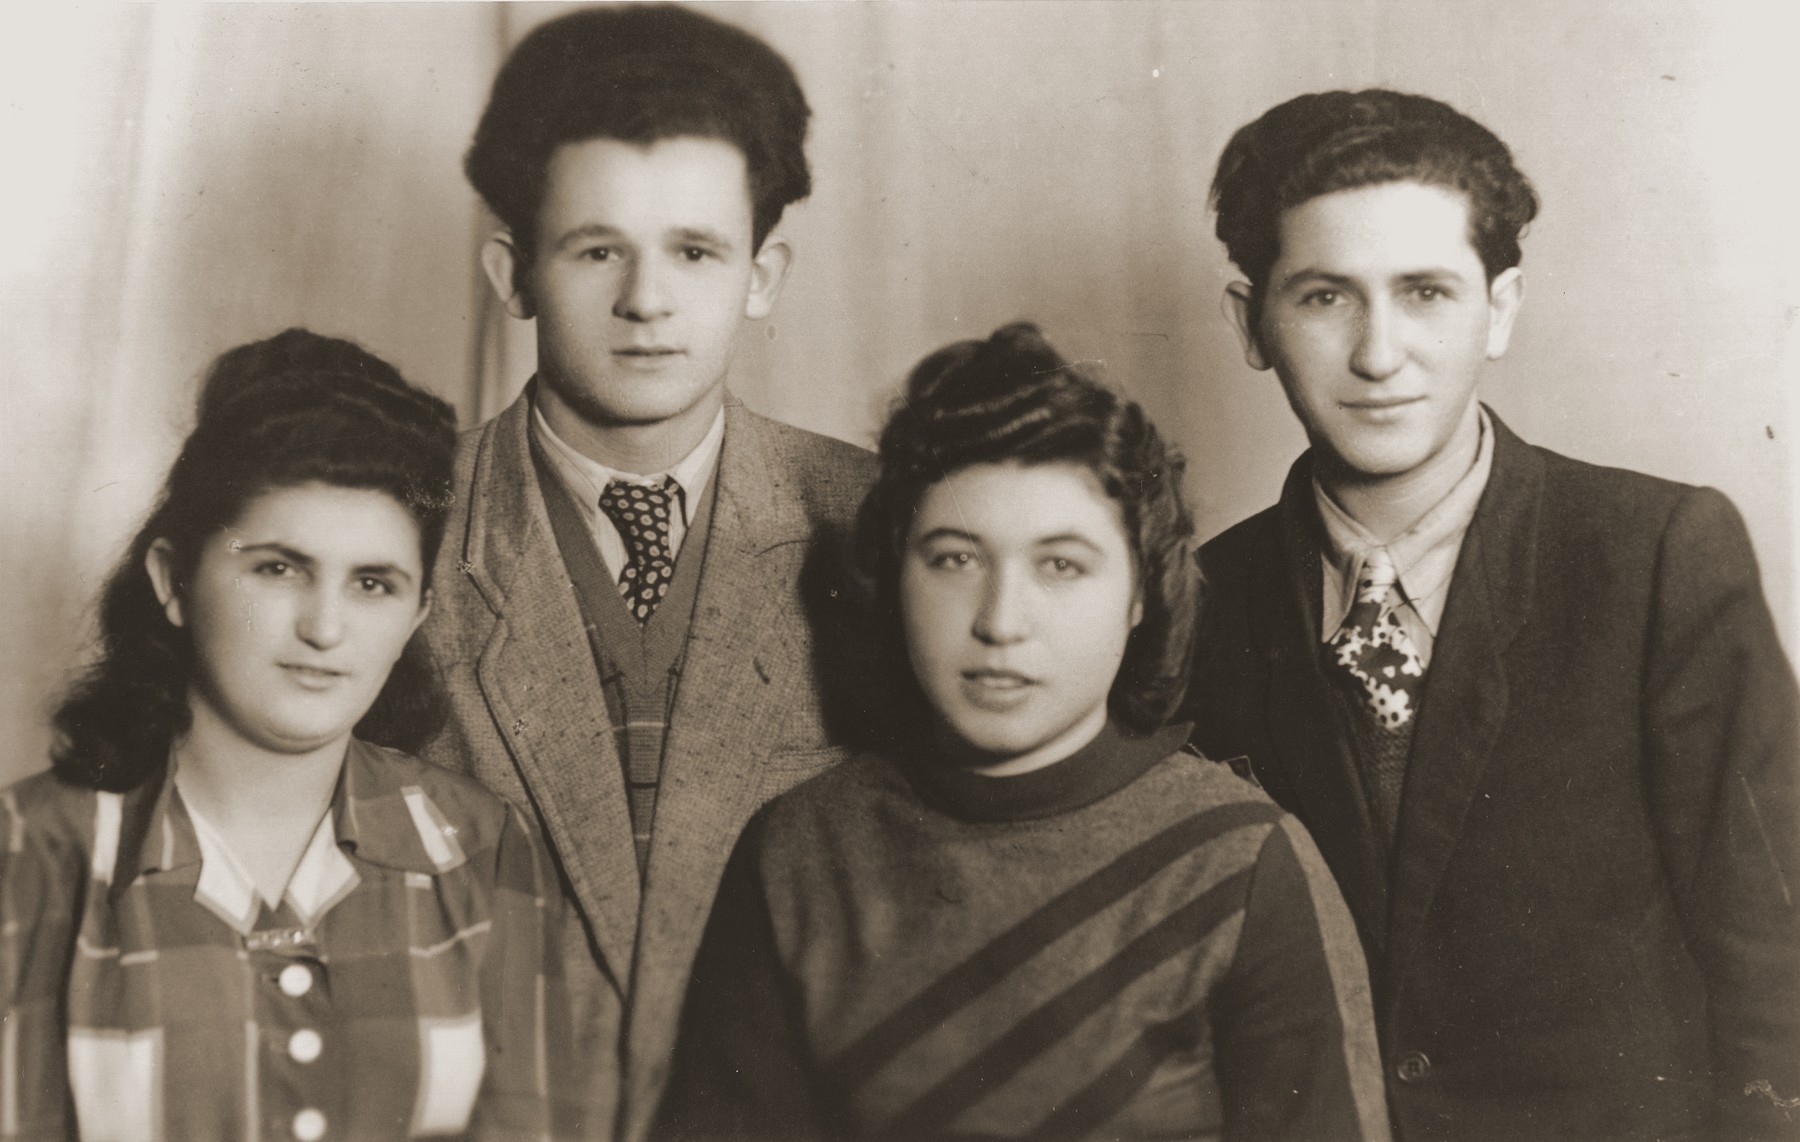 Group portrait of four young people in the Bad Reichenhall displaced persons camp.

Rochelle Szklarski is pictured second from right.